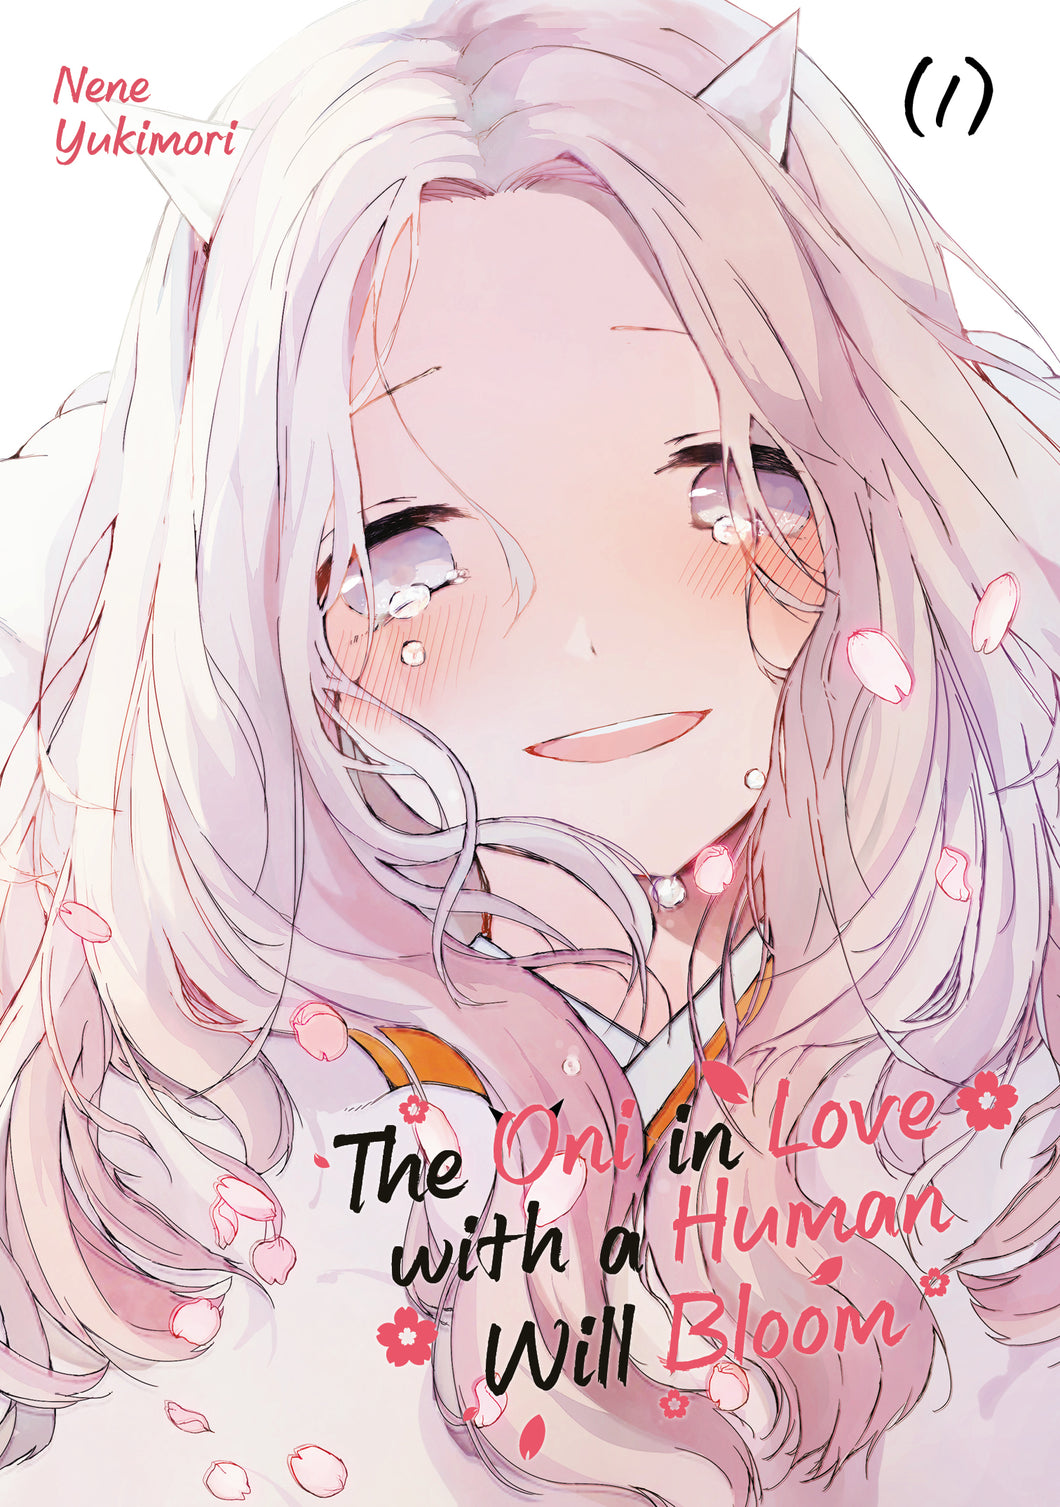 The Oni in Love with a Human Will Bloom